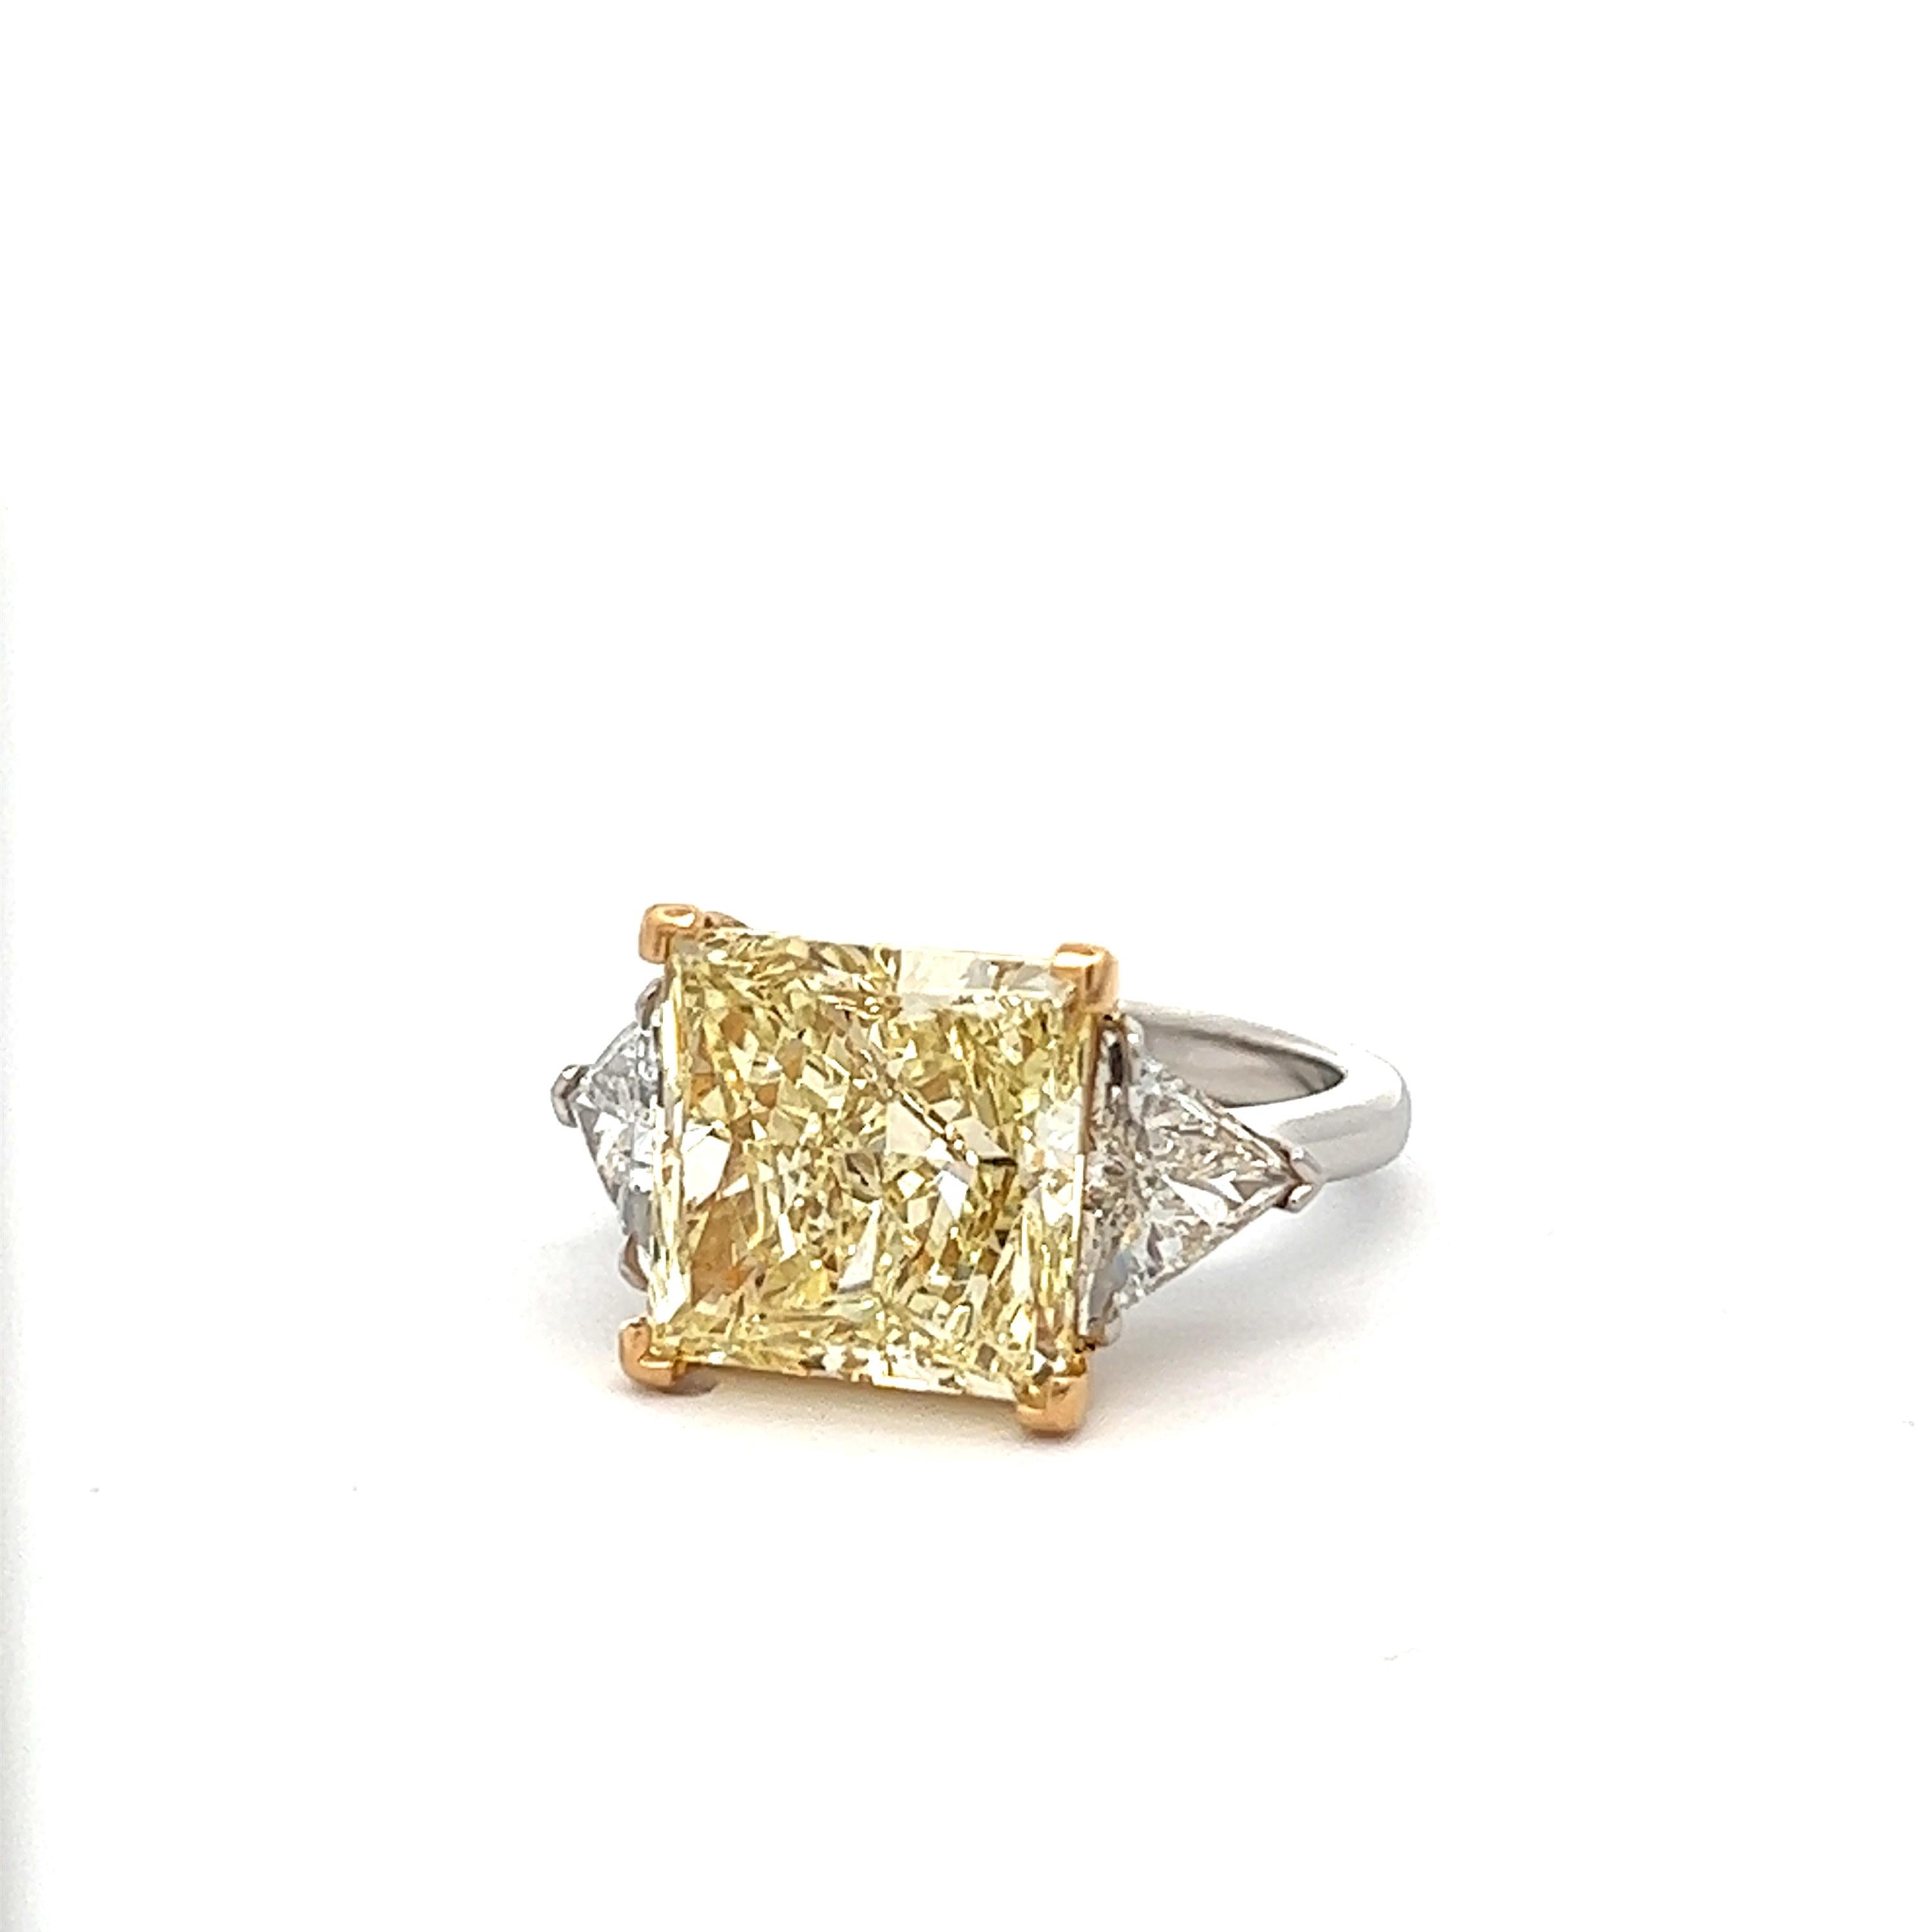 6.91 carat Princess Cut, Natural Fancy Light Yellow VS2 Clarity,  with two 1.15 CT F Colors VS2-SI1 Clarity is accompanied by a GIA certificate. This incredible bright cushion is full of life and set in a handmade 18K White & Yellow gold setting,